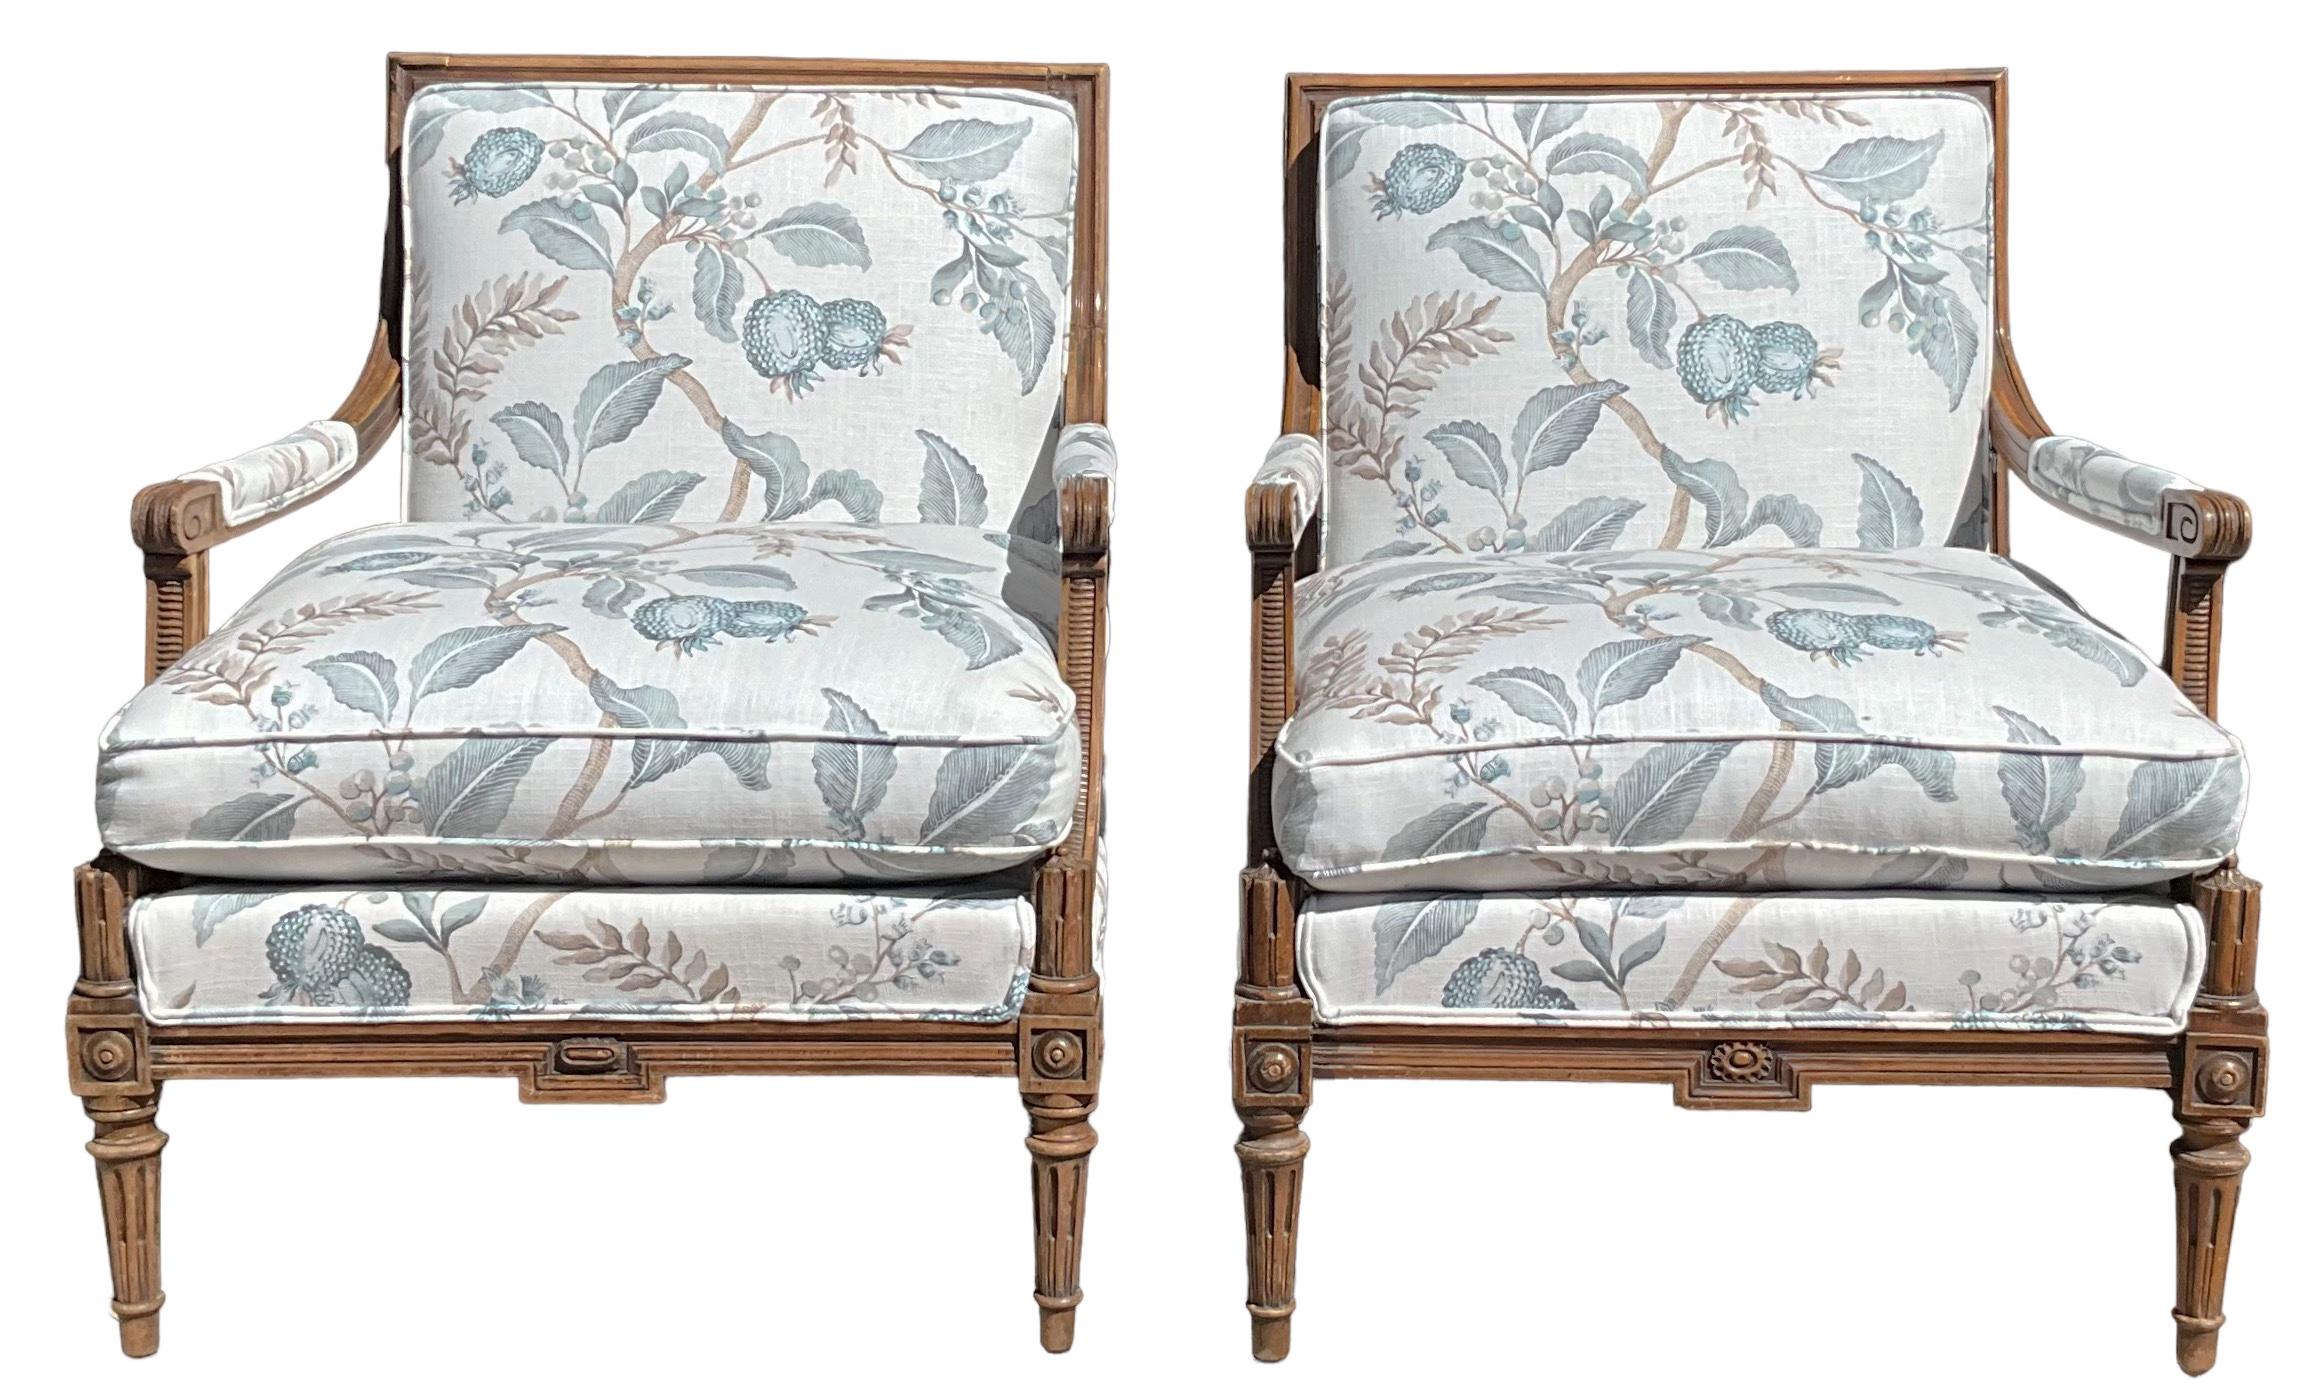 20th Century Early 20th-C. French Carved Walnut Bergere Chairs In New Floral Linen -Pair For Sale